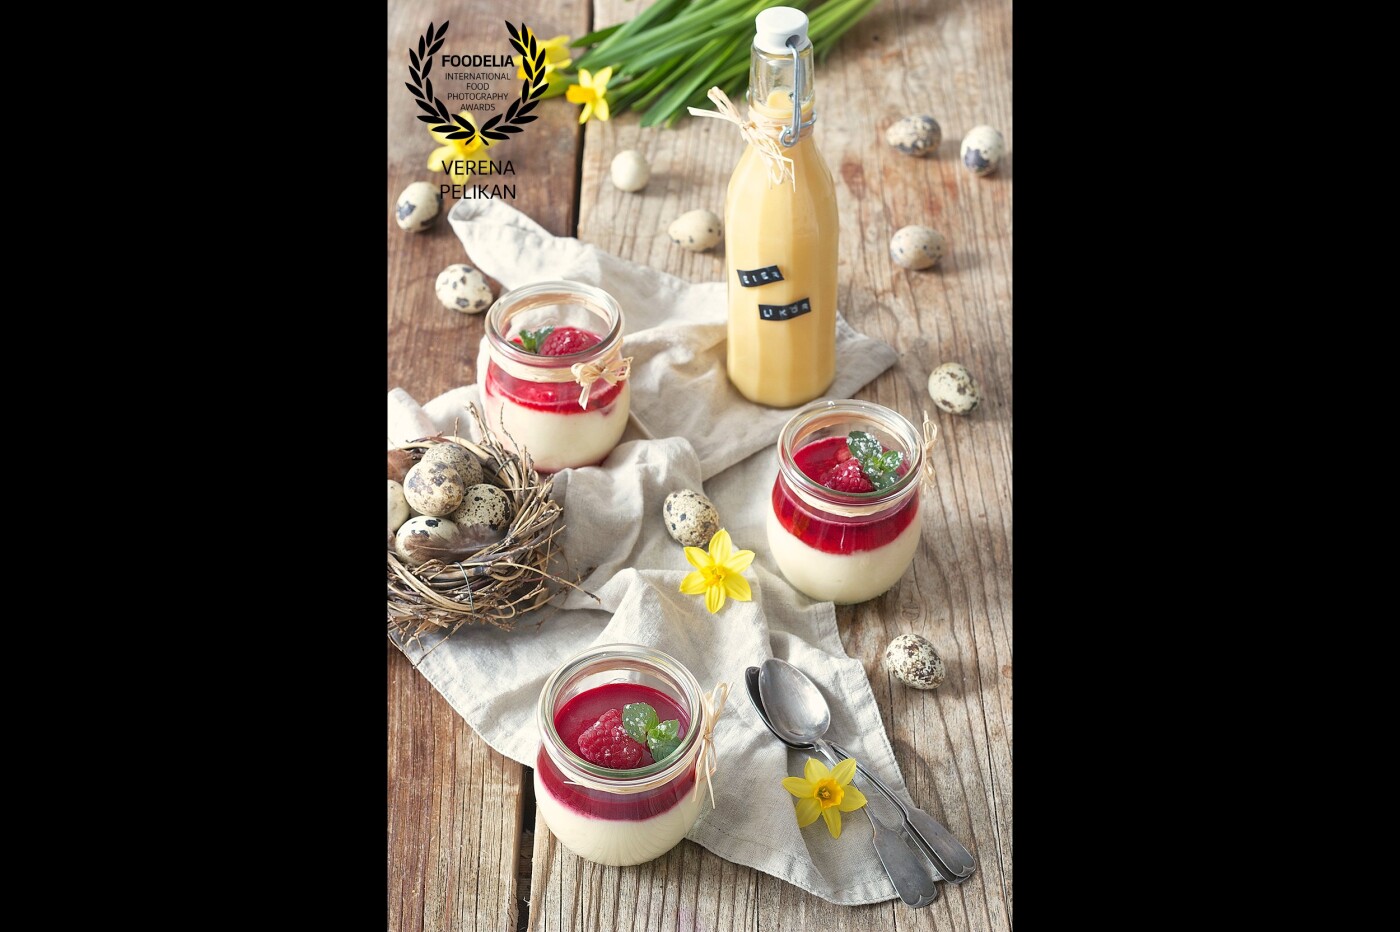 Egg liqueur mousse with raspberries - a quick and easy to make dessert. Perfect for Easter brunch and as Easter dessert.<br />
Recipe can be found on my website https://www.sweetsandlifestyle.com/rezept/schnelles-eierlikoer-mousse/